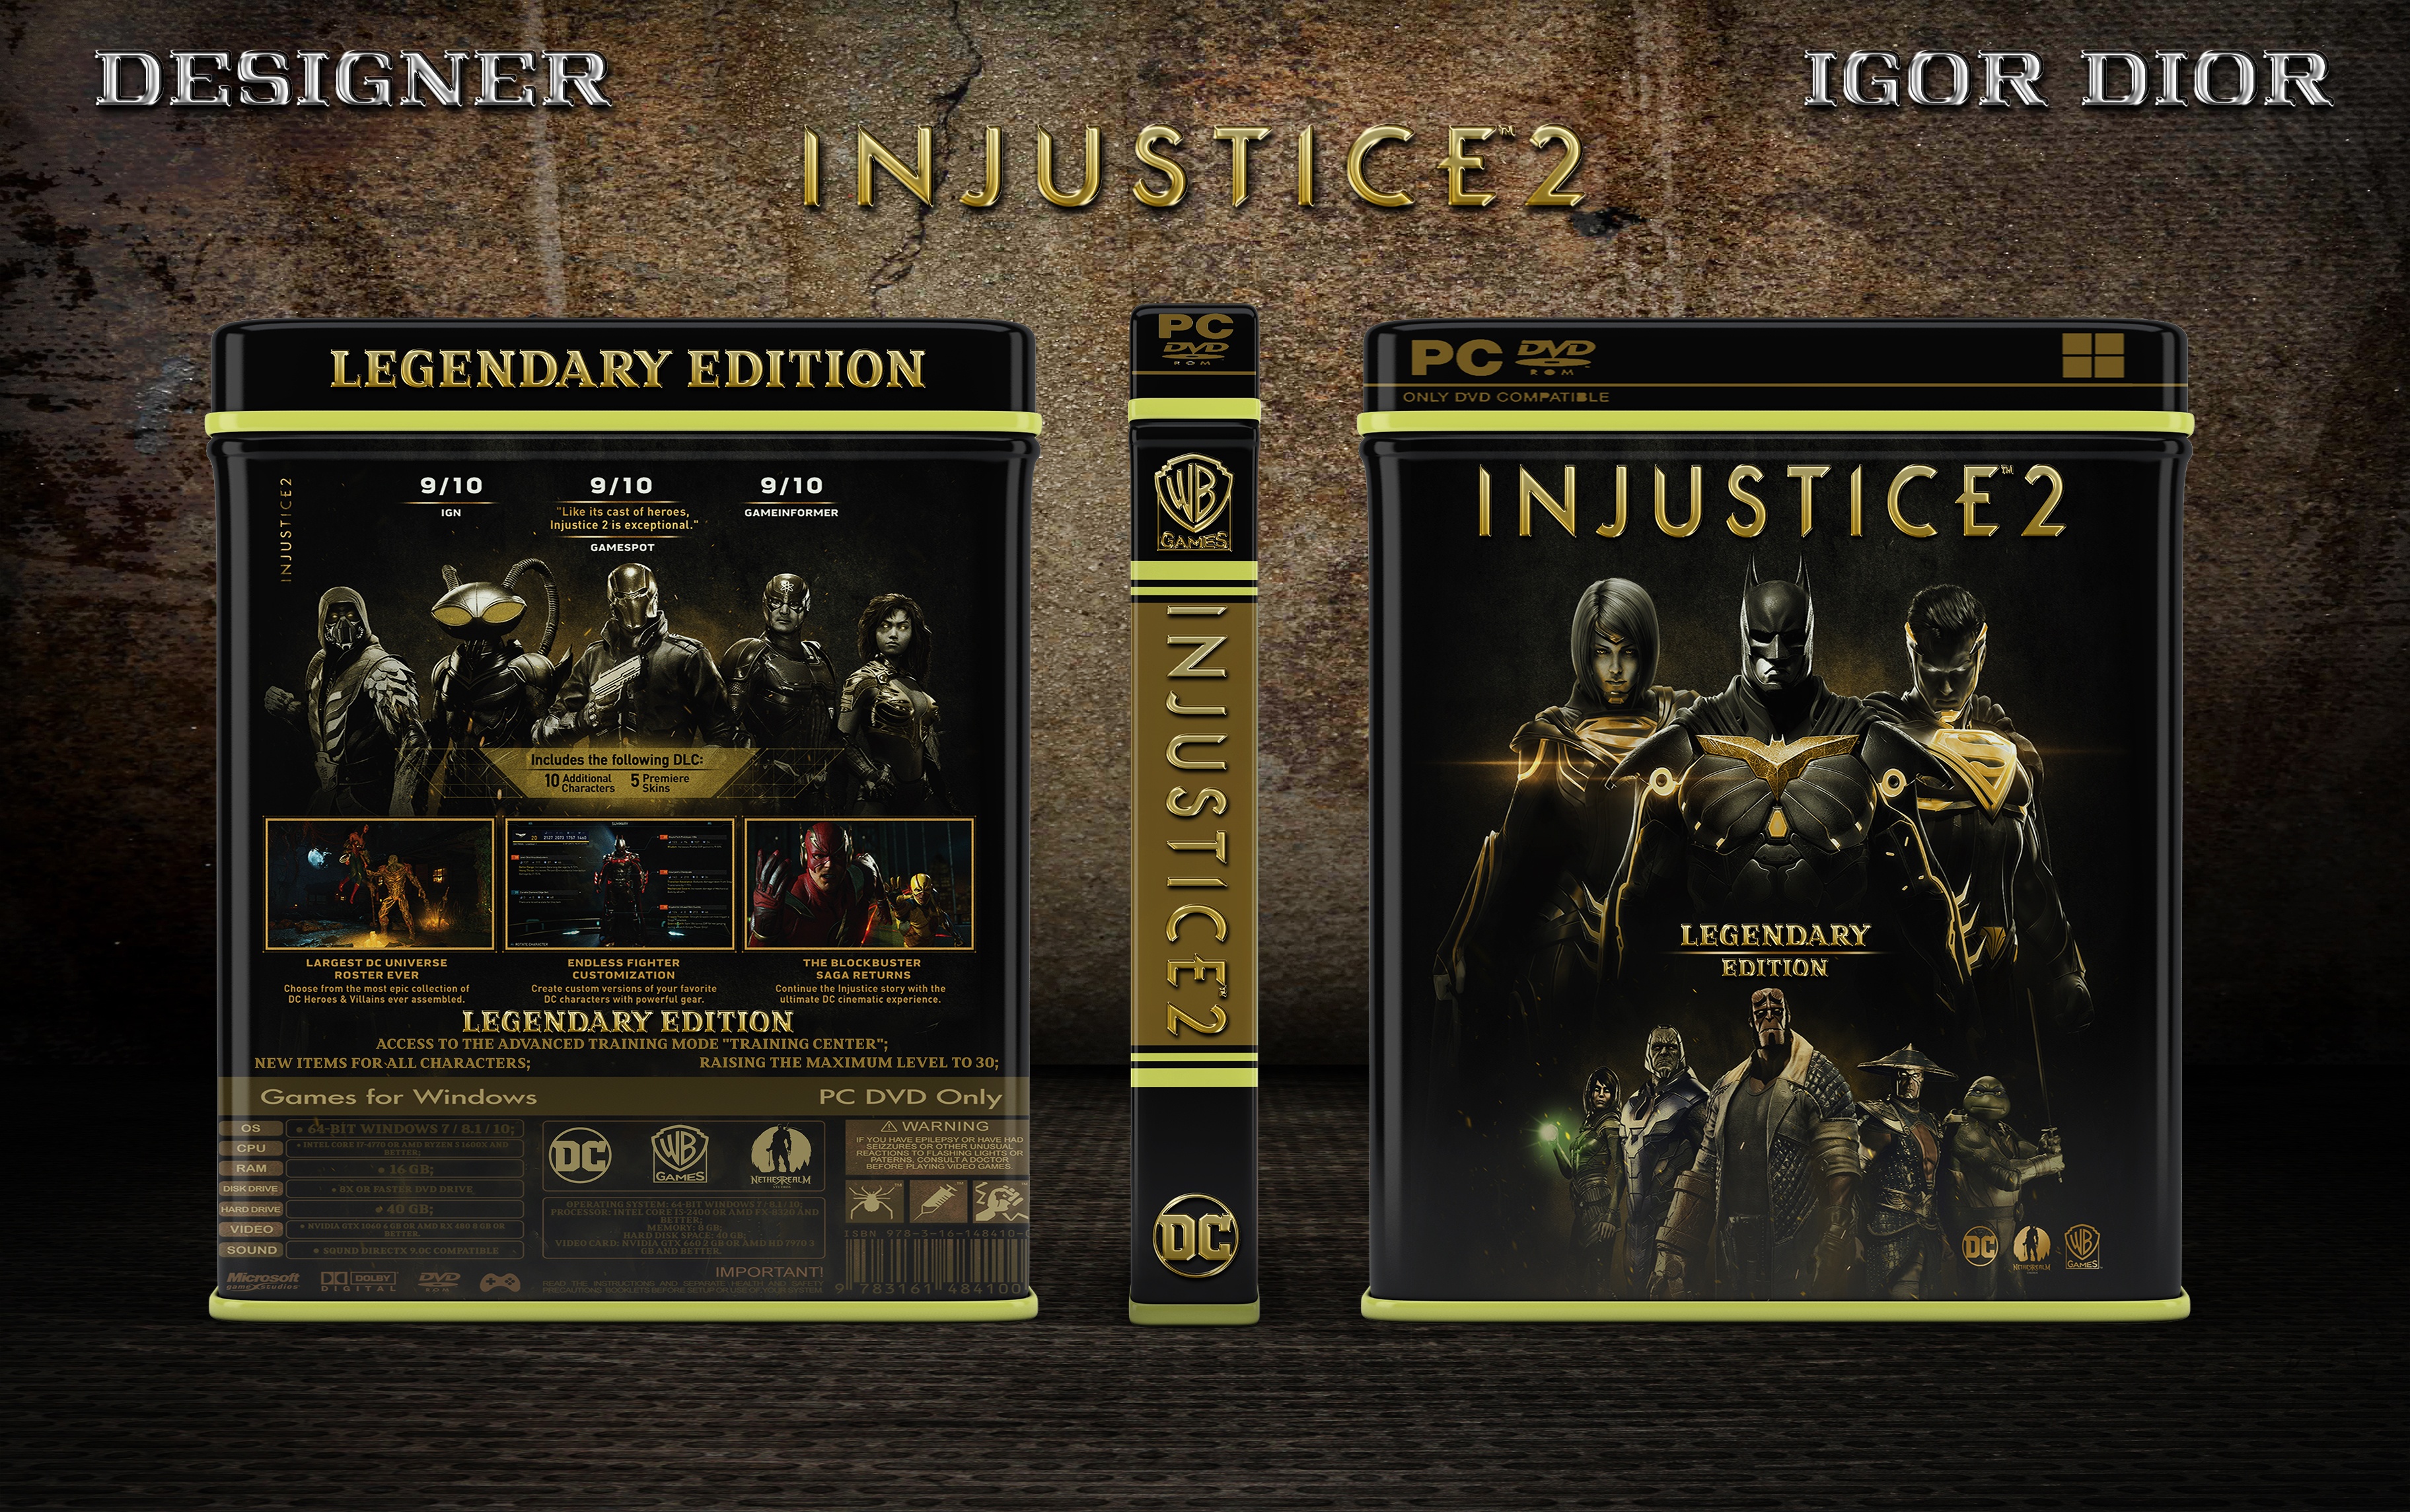 Injustice 2: Legendary Edition box cover